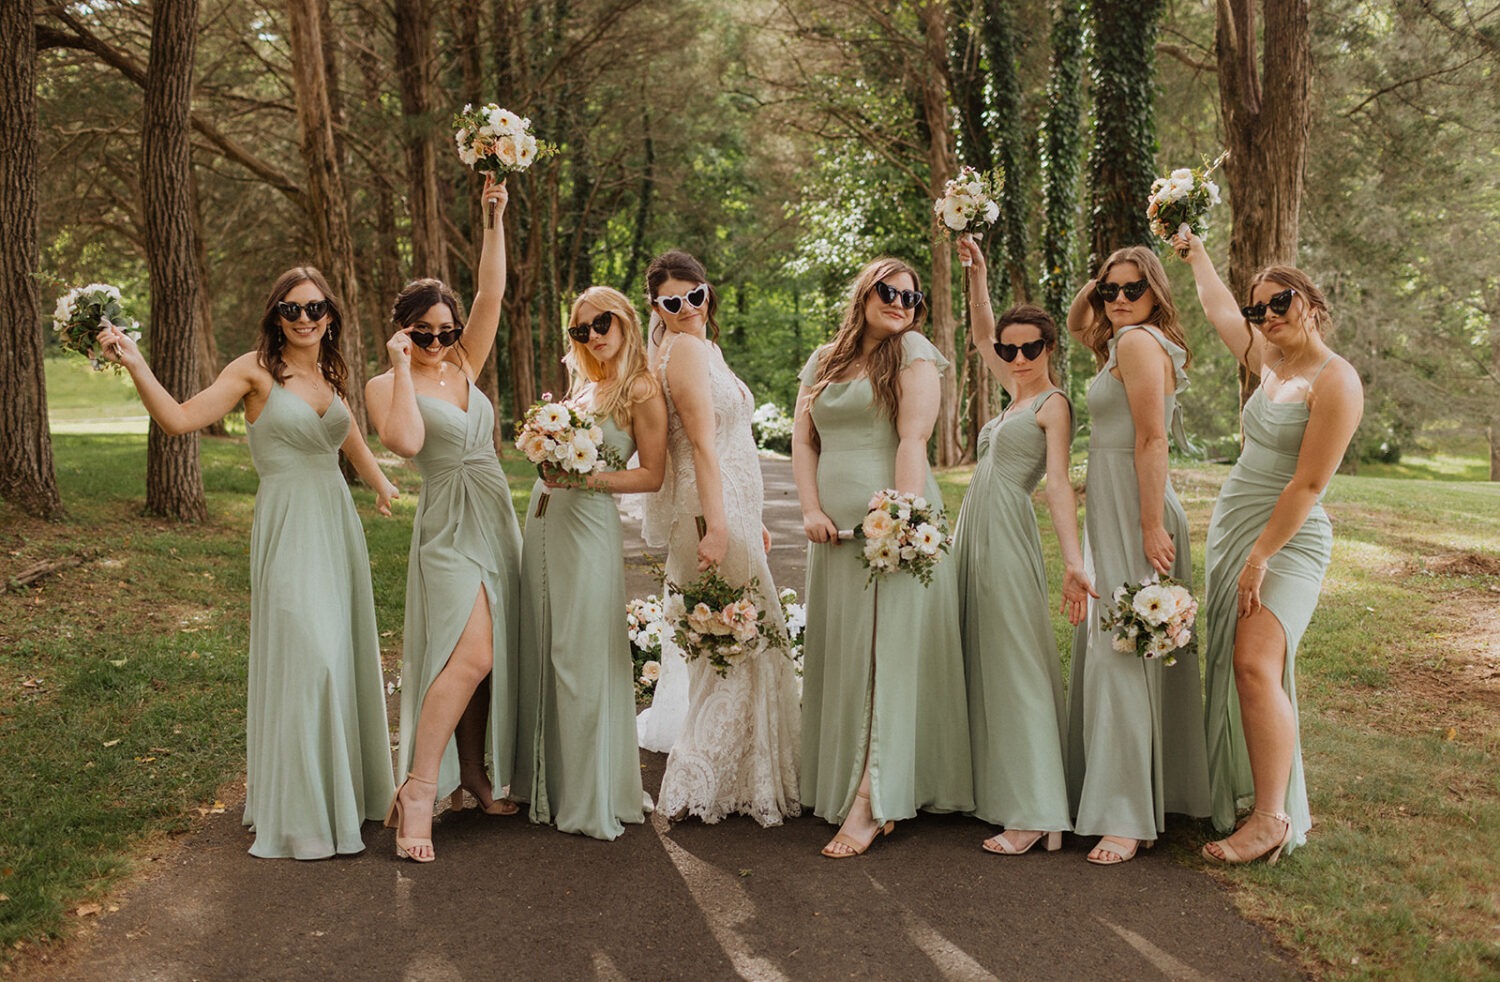 bride poses with bridesmaids wearing sunglasses doing wedding photo poses